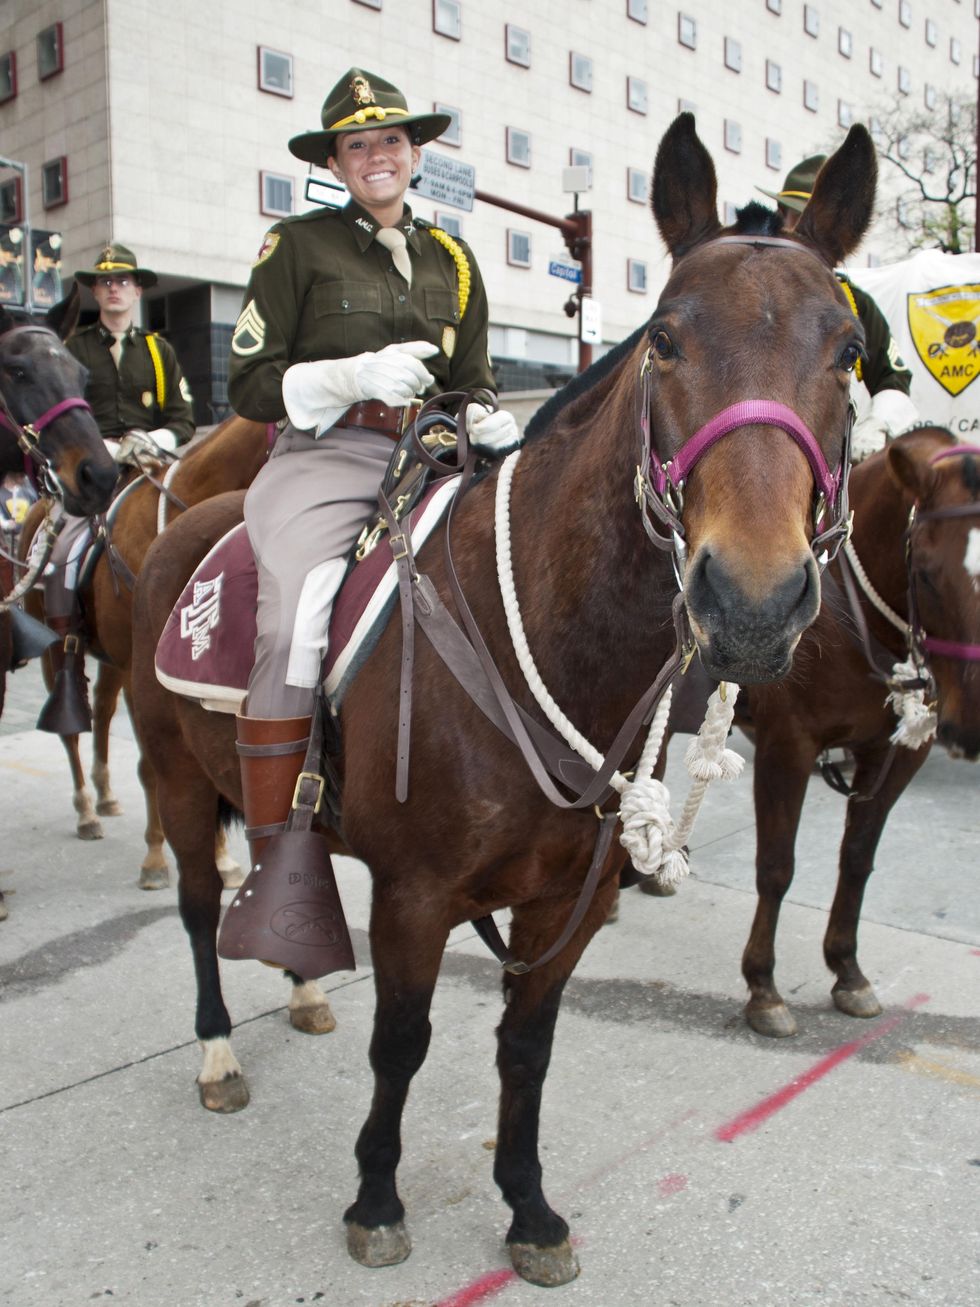 News_025_RodeoHouston parade_February 2012_Texas A&M Corps of Cadets Amanda Belser (she's a Junior studying Industrial Distribution). Her horse, Cowboy, totally posed for the photo.jpg